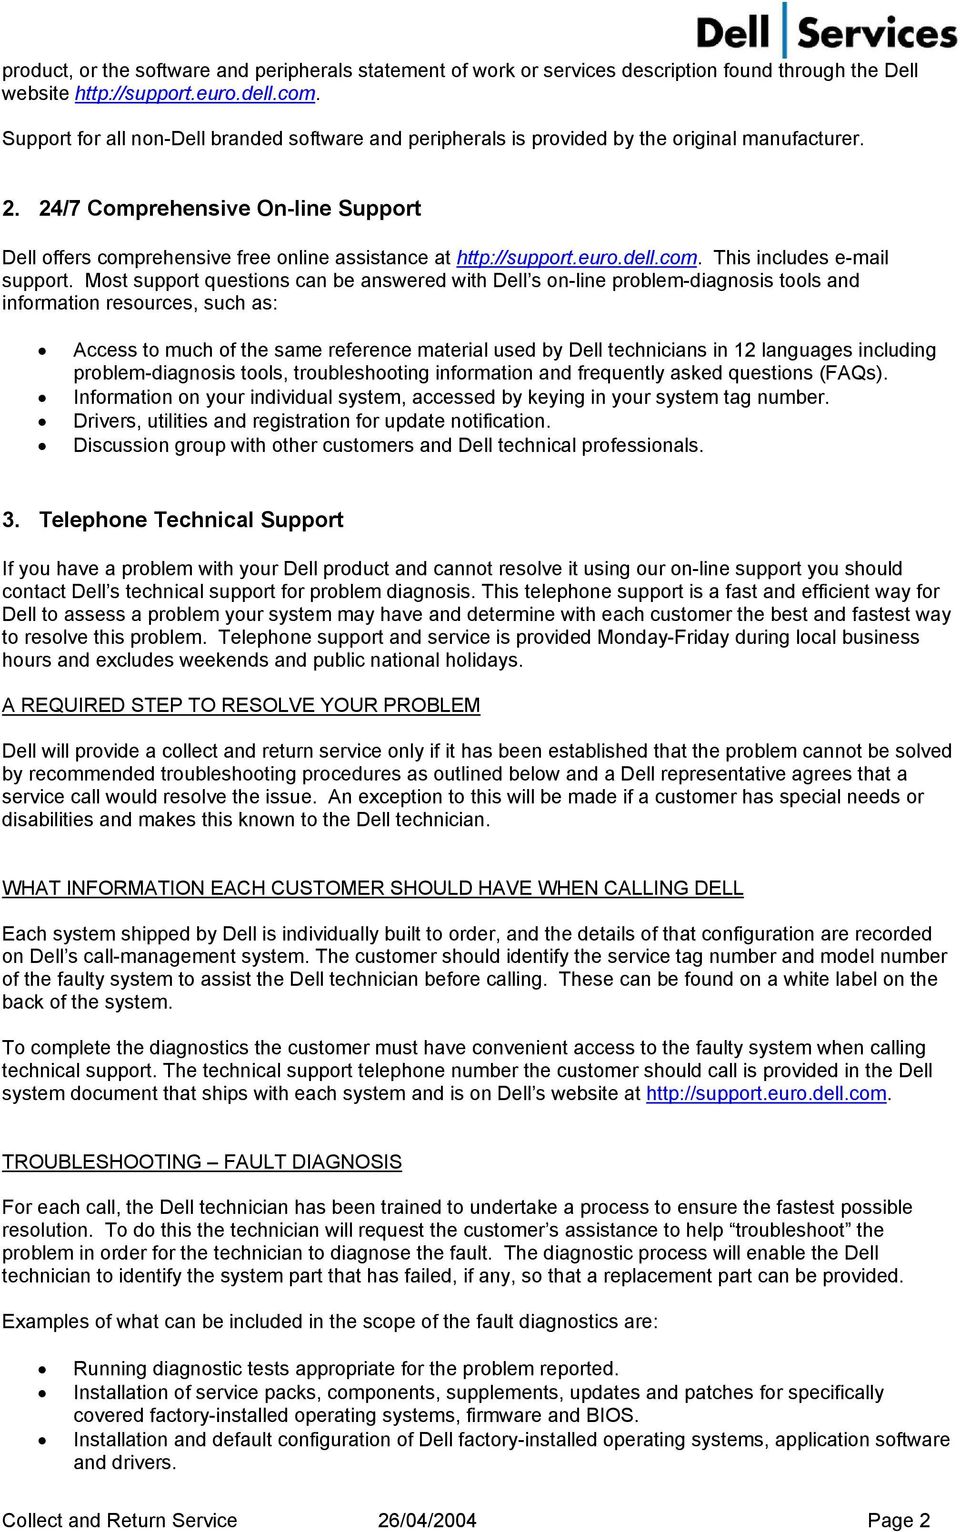 24/7 Comprehensive On-line Support Dell offers comprehensive free online assistance at http://support.euro.dell.com. This includes e-mail support.